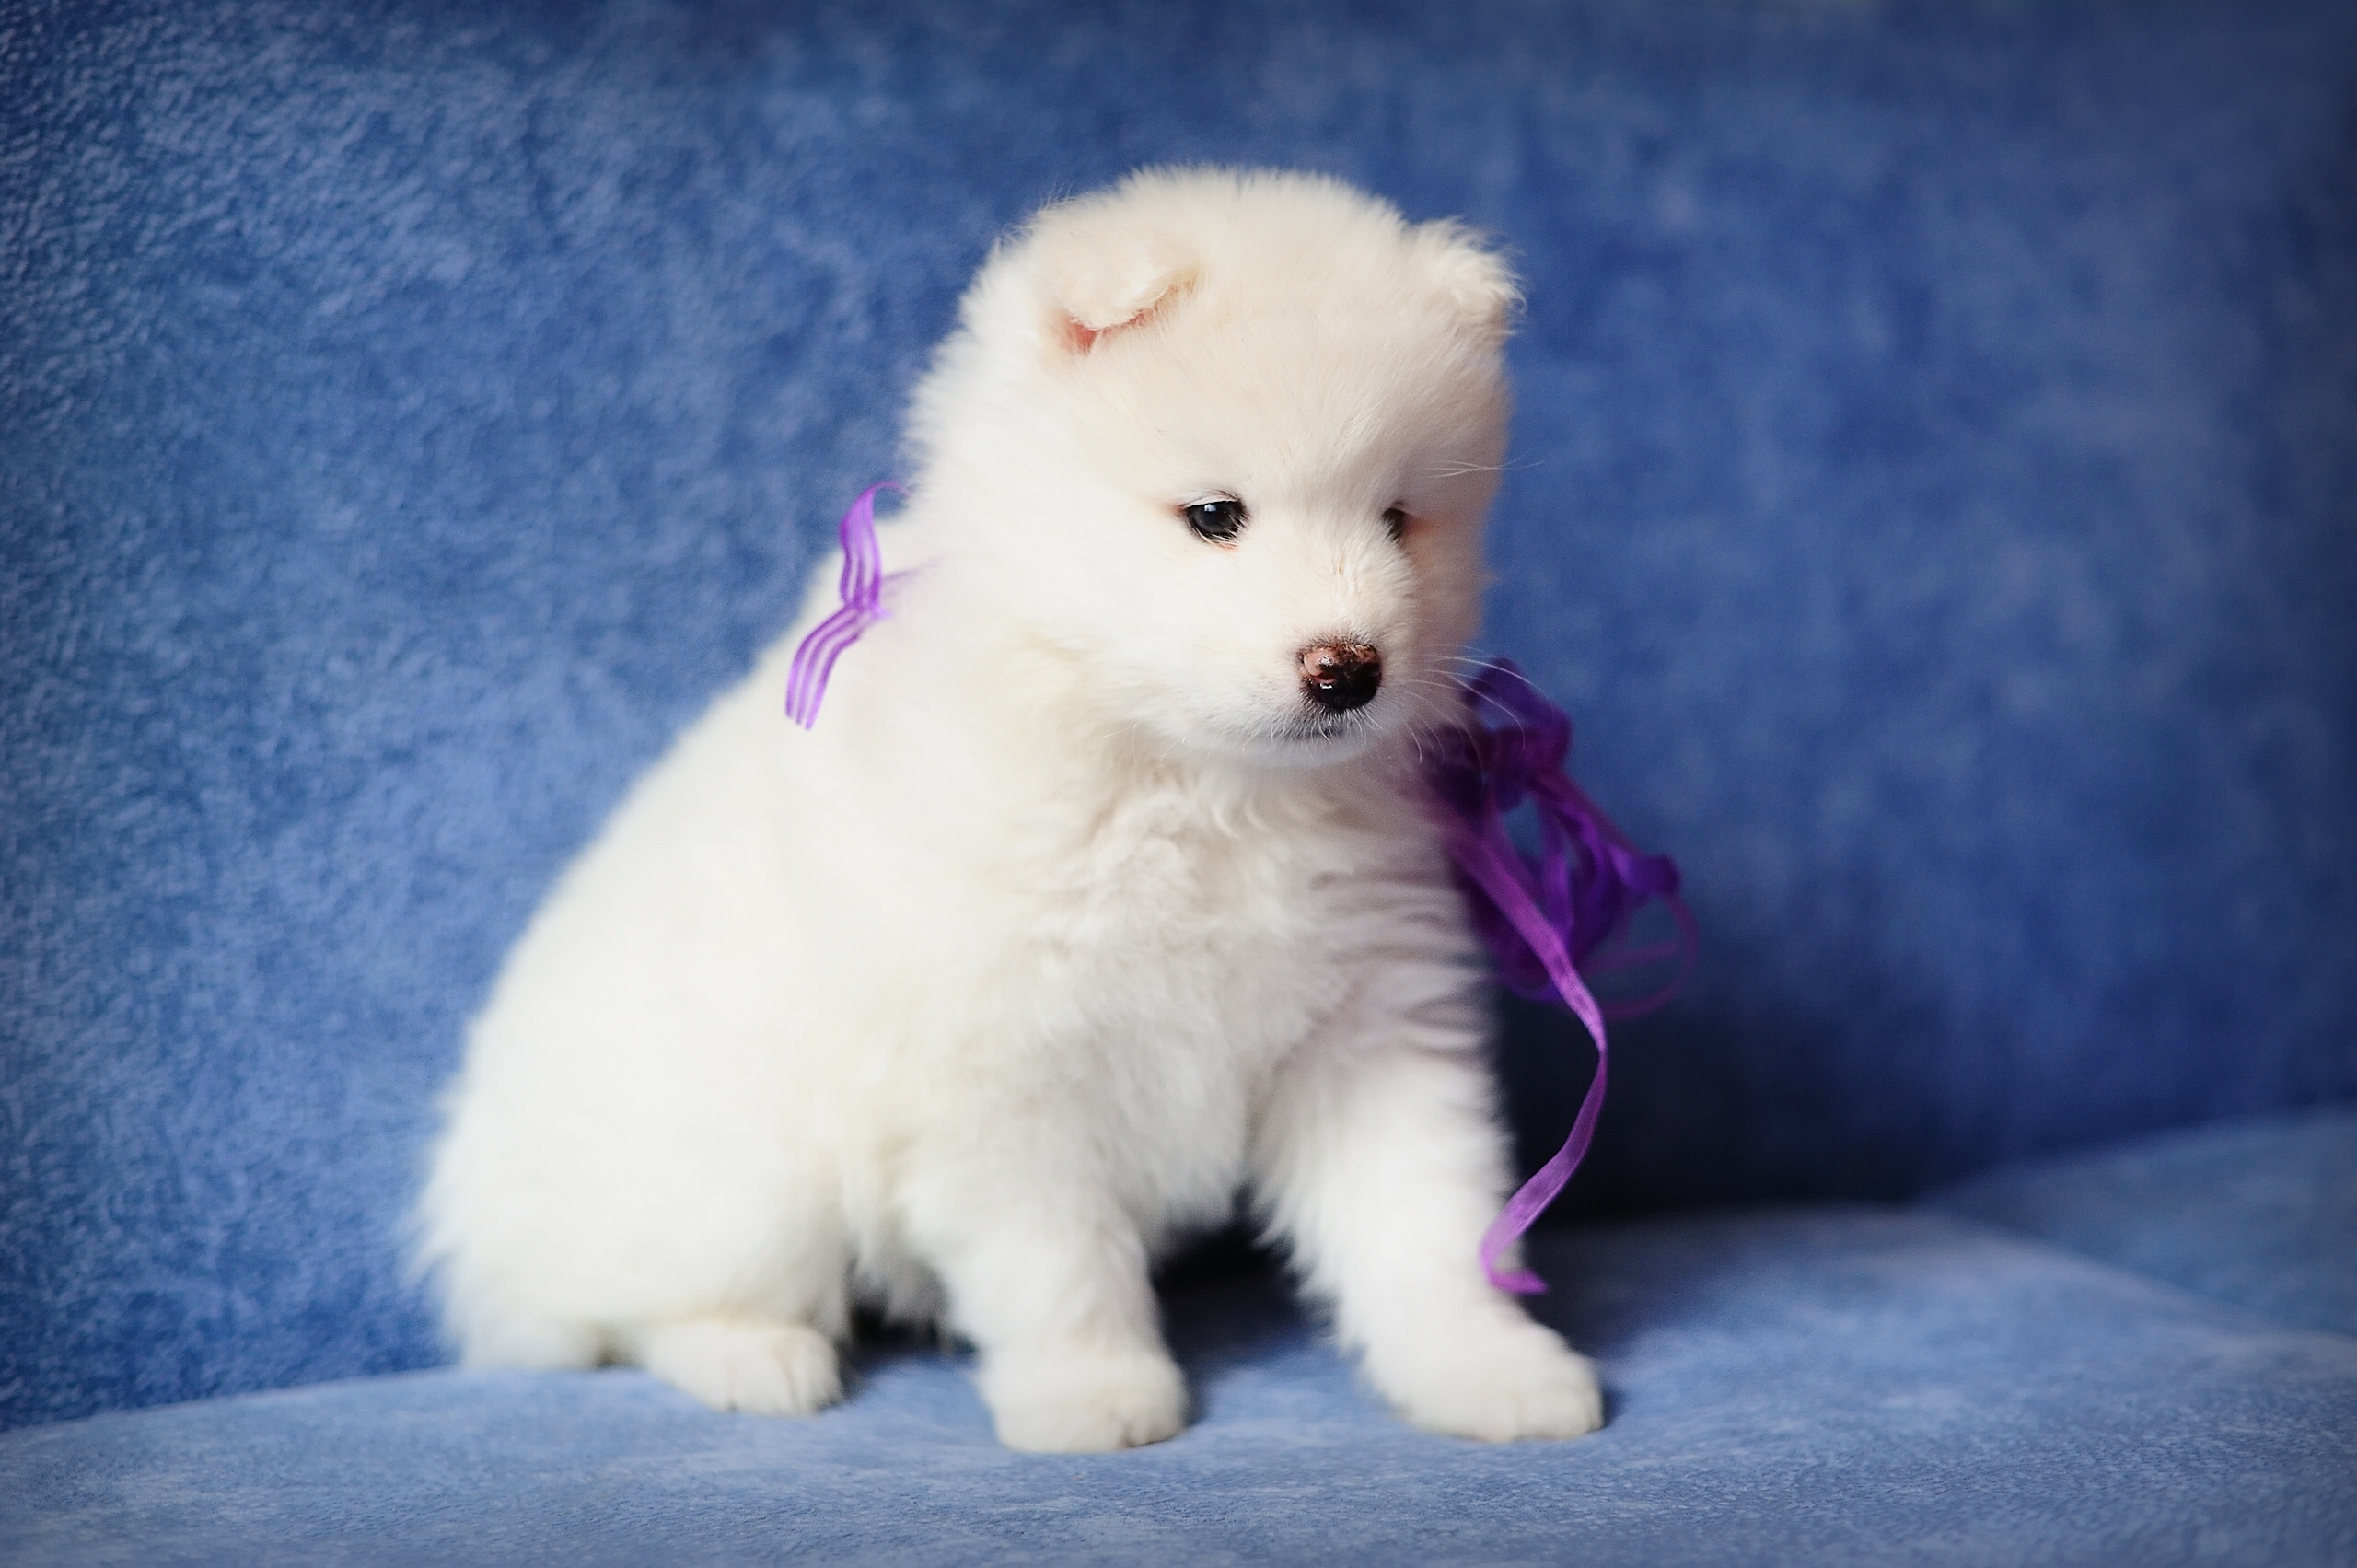  Samoyed HQ Background Wallpapers